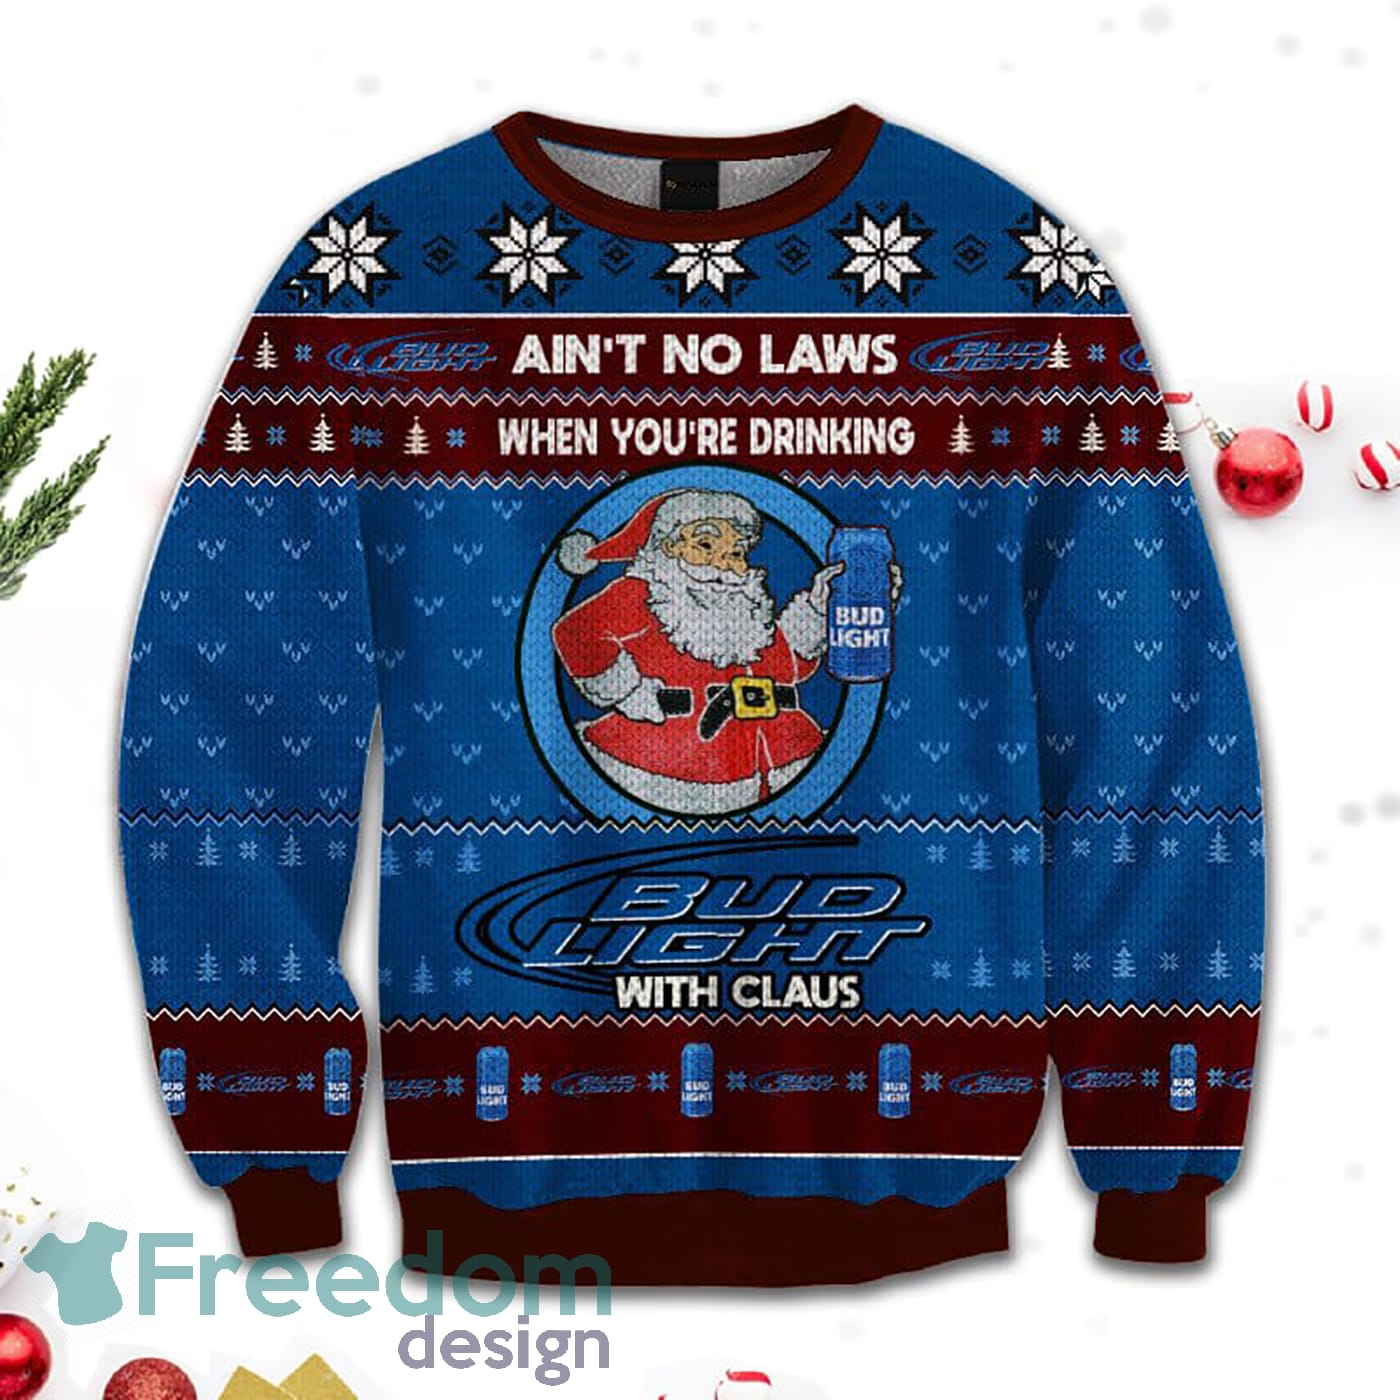 Merr Christmas Ain't No Laws When You Drink Bud Light With Claus Sweatshirt